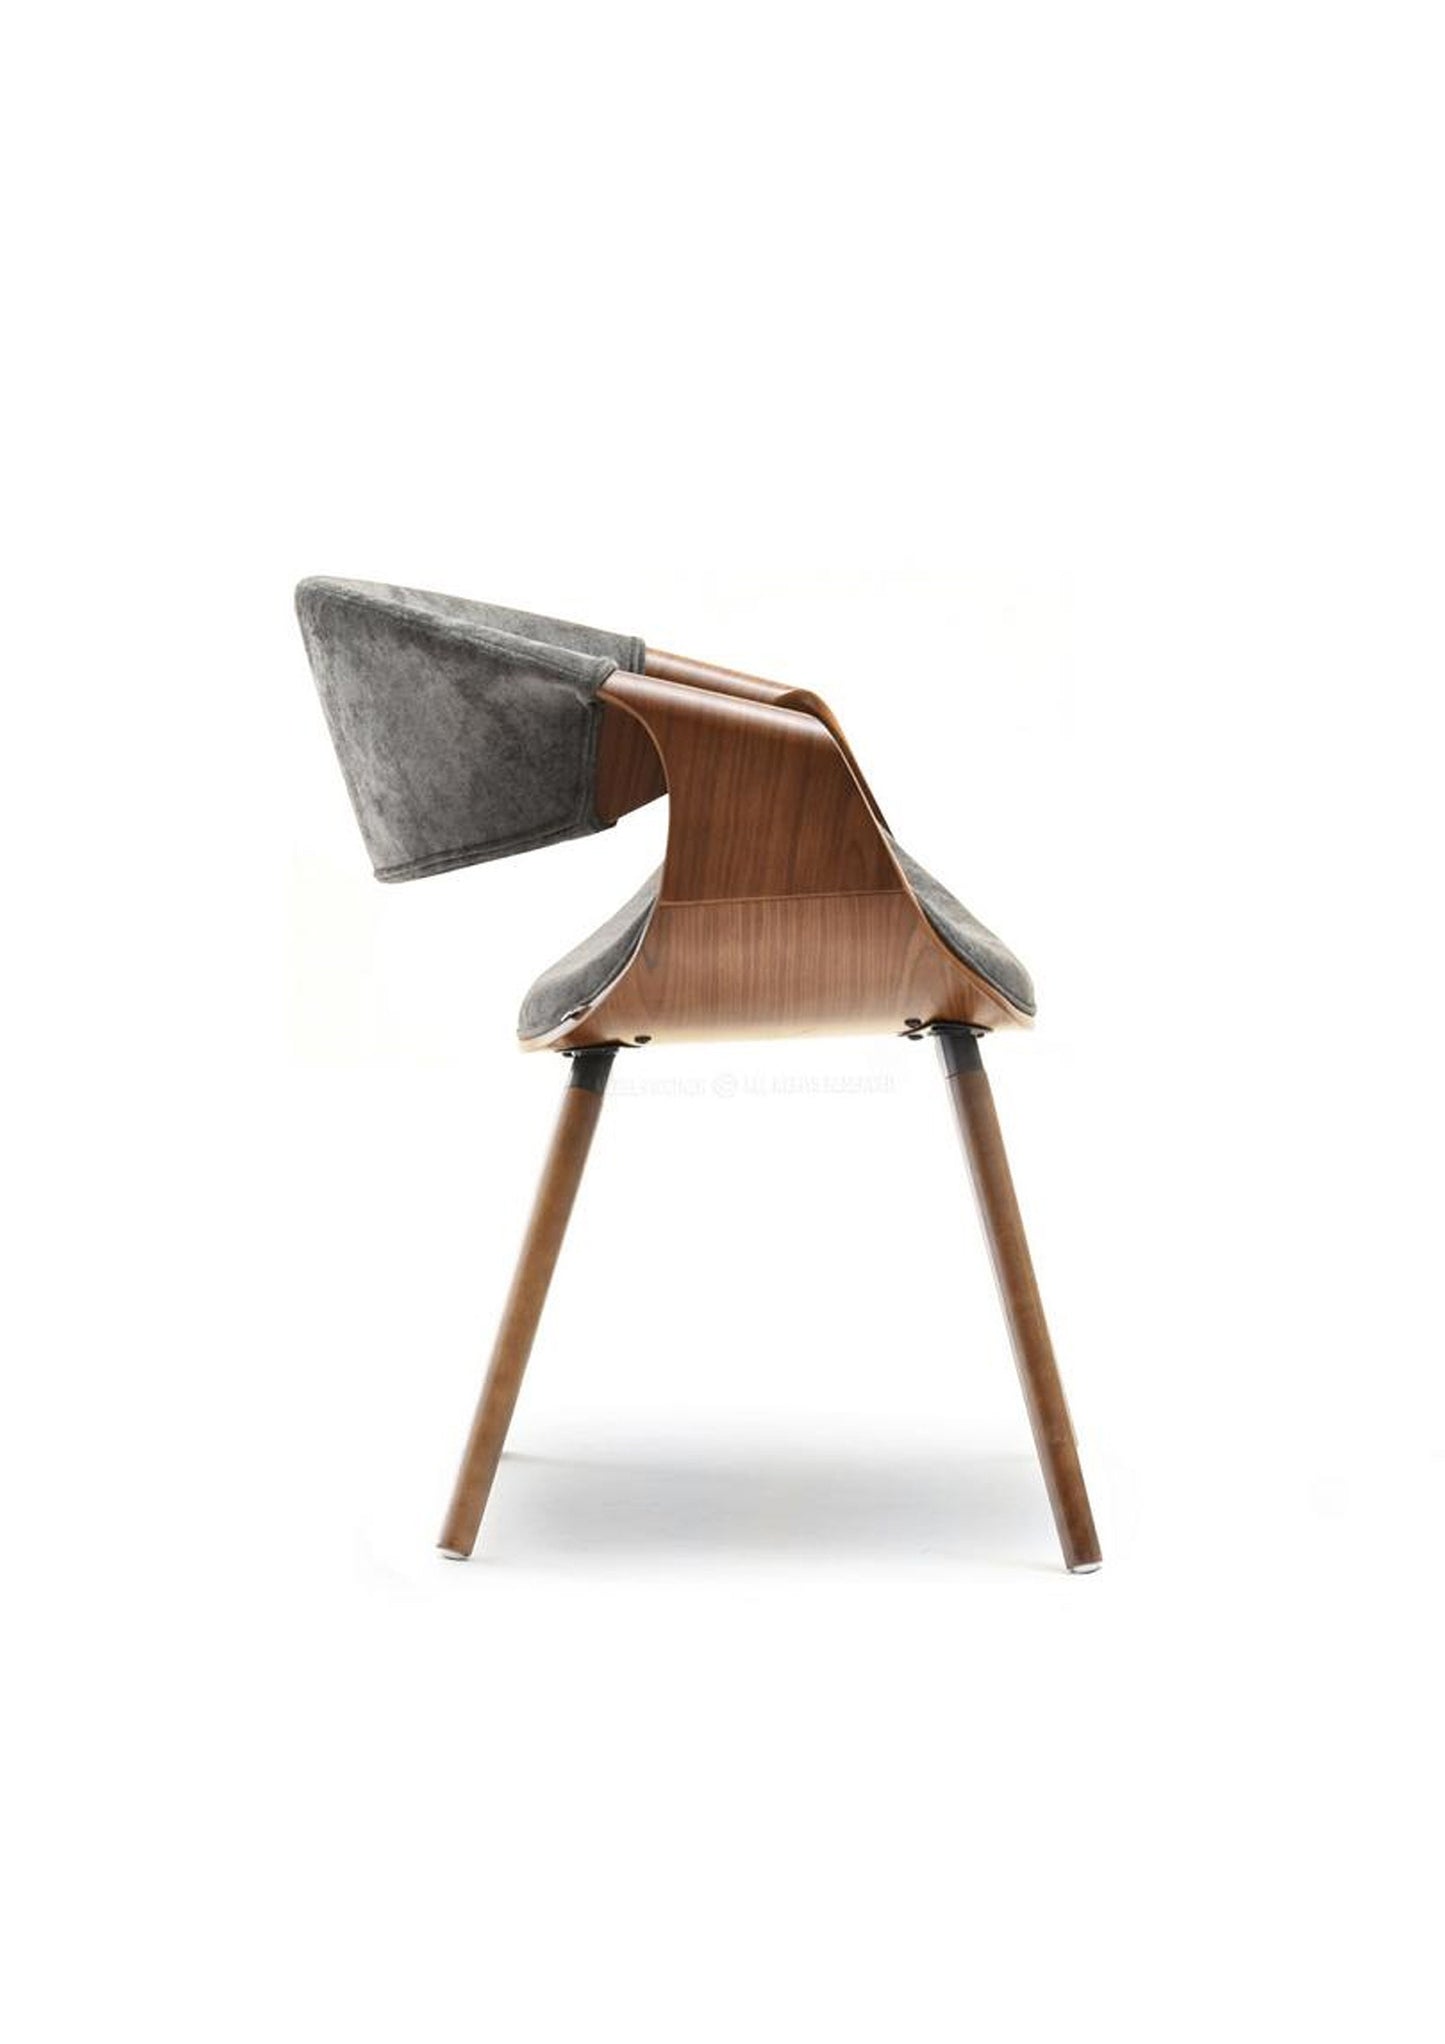 NEW Designer RETRO SCANDI Style office desk chair grey and walnut wood or black and walnut - Choose colour